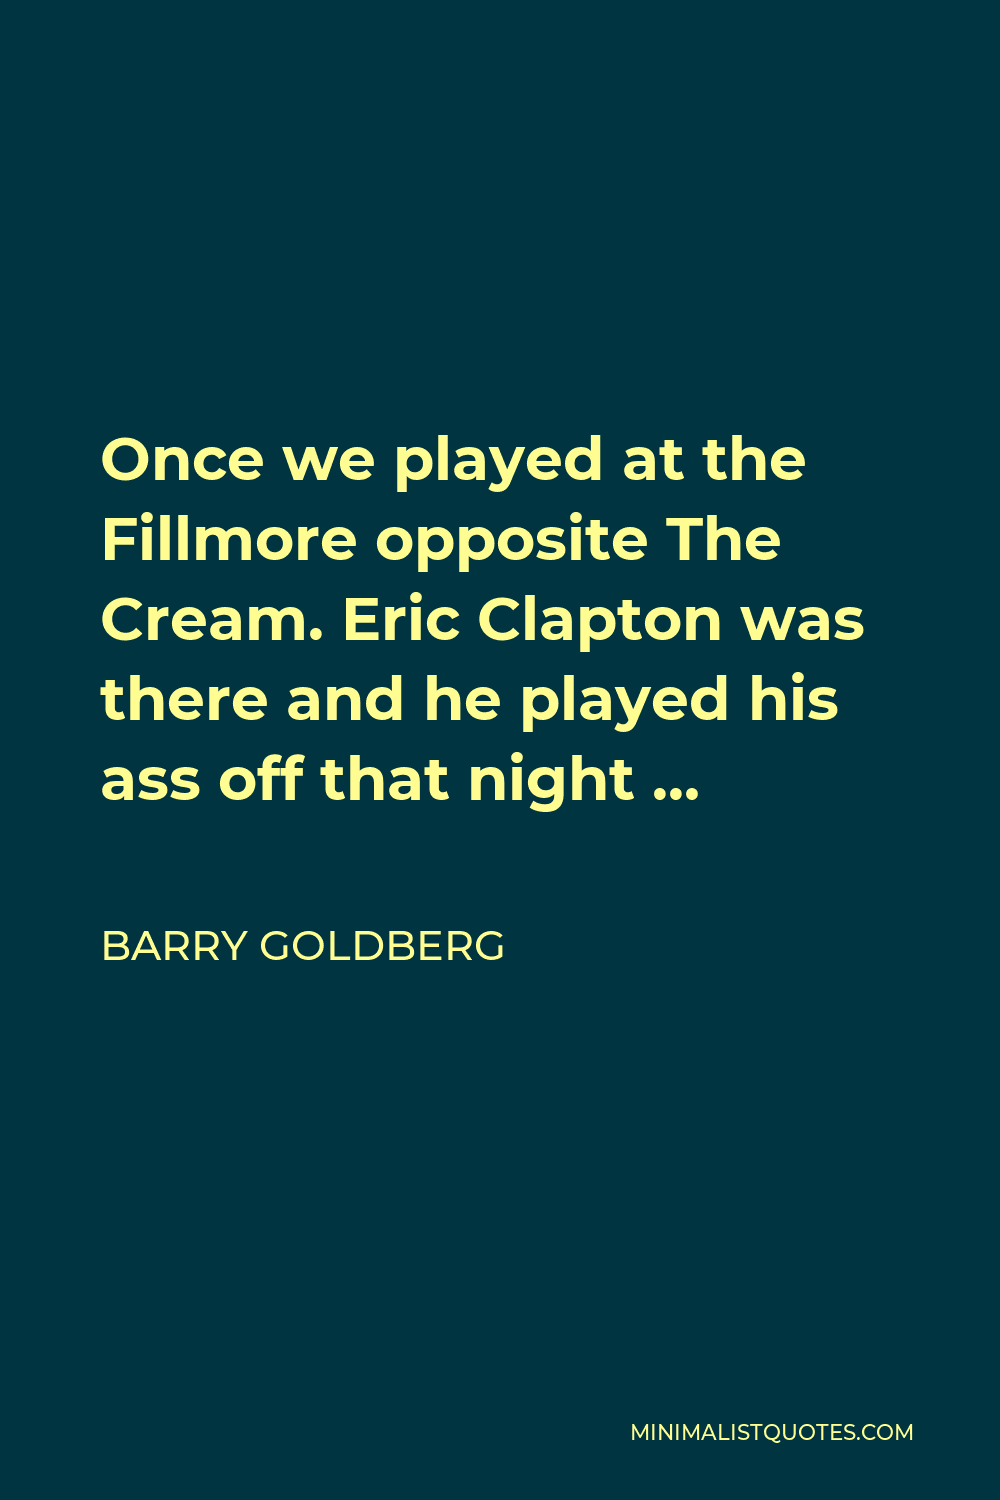 Barry Goldberg Quote - Once we played at the Fillmore opposite The Cream. Eric Clapton was there and he played his ass off that night …